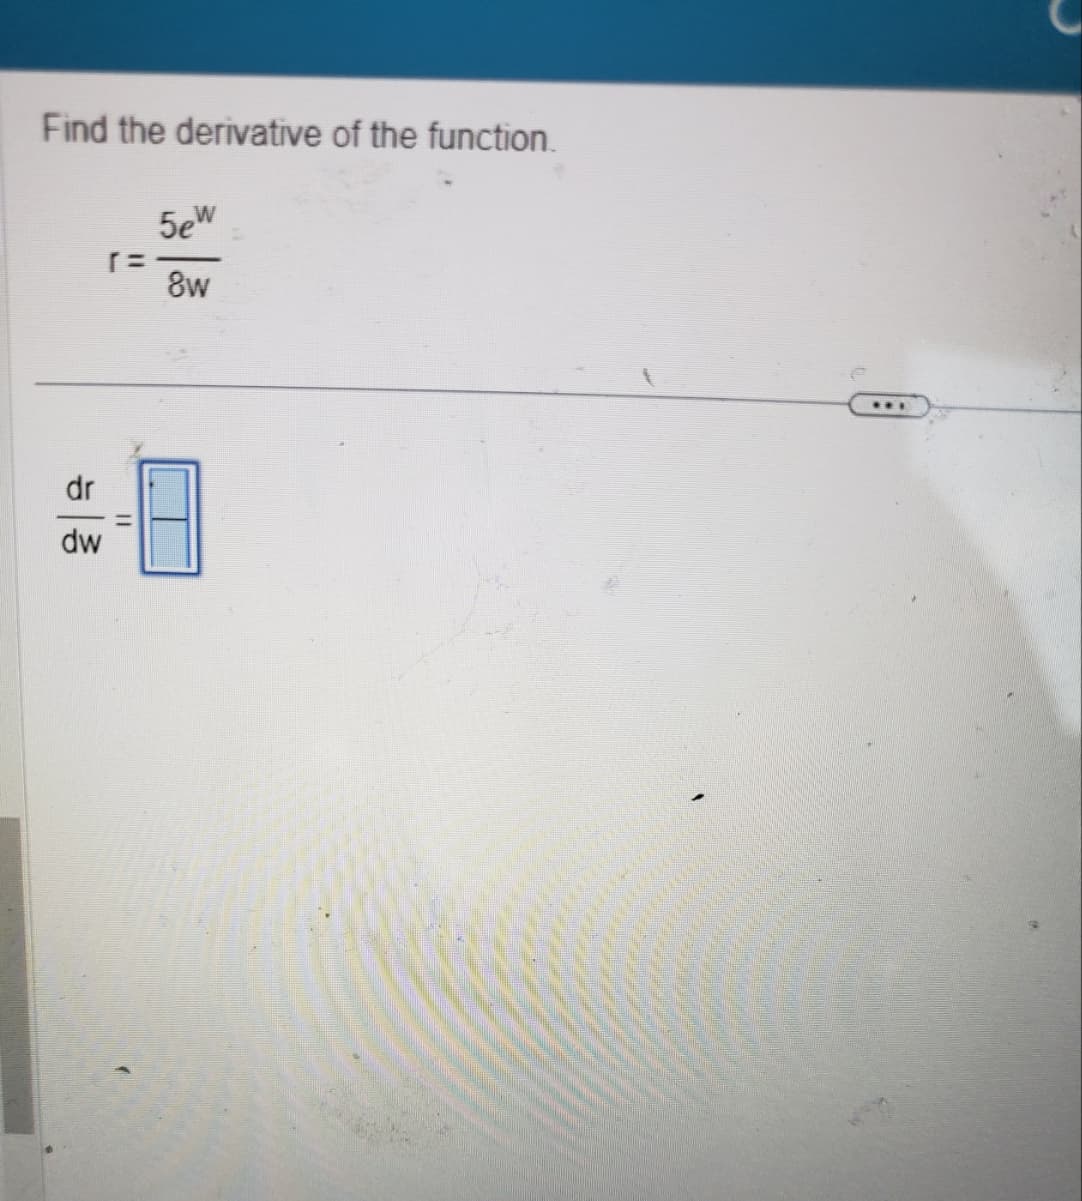 Find the derivative of the function.
dr
dw
(=
11
5ew
8w
***